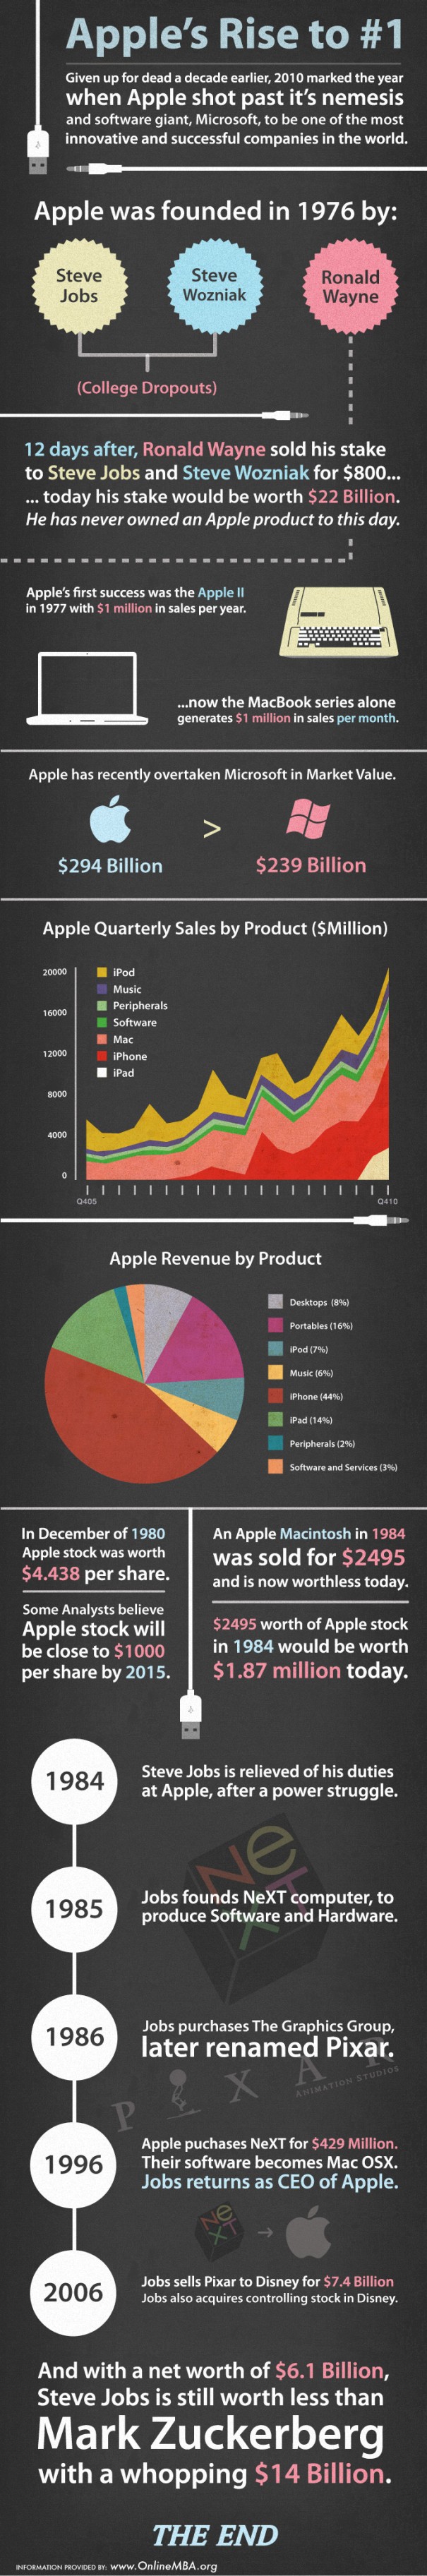 Apple's Rise to Number 1